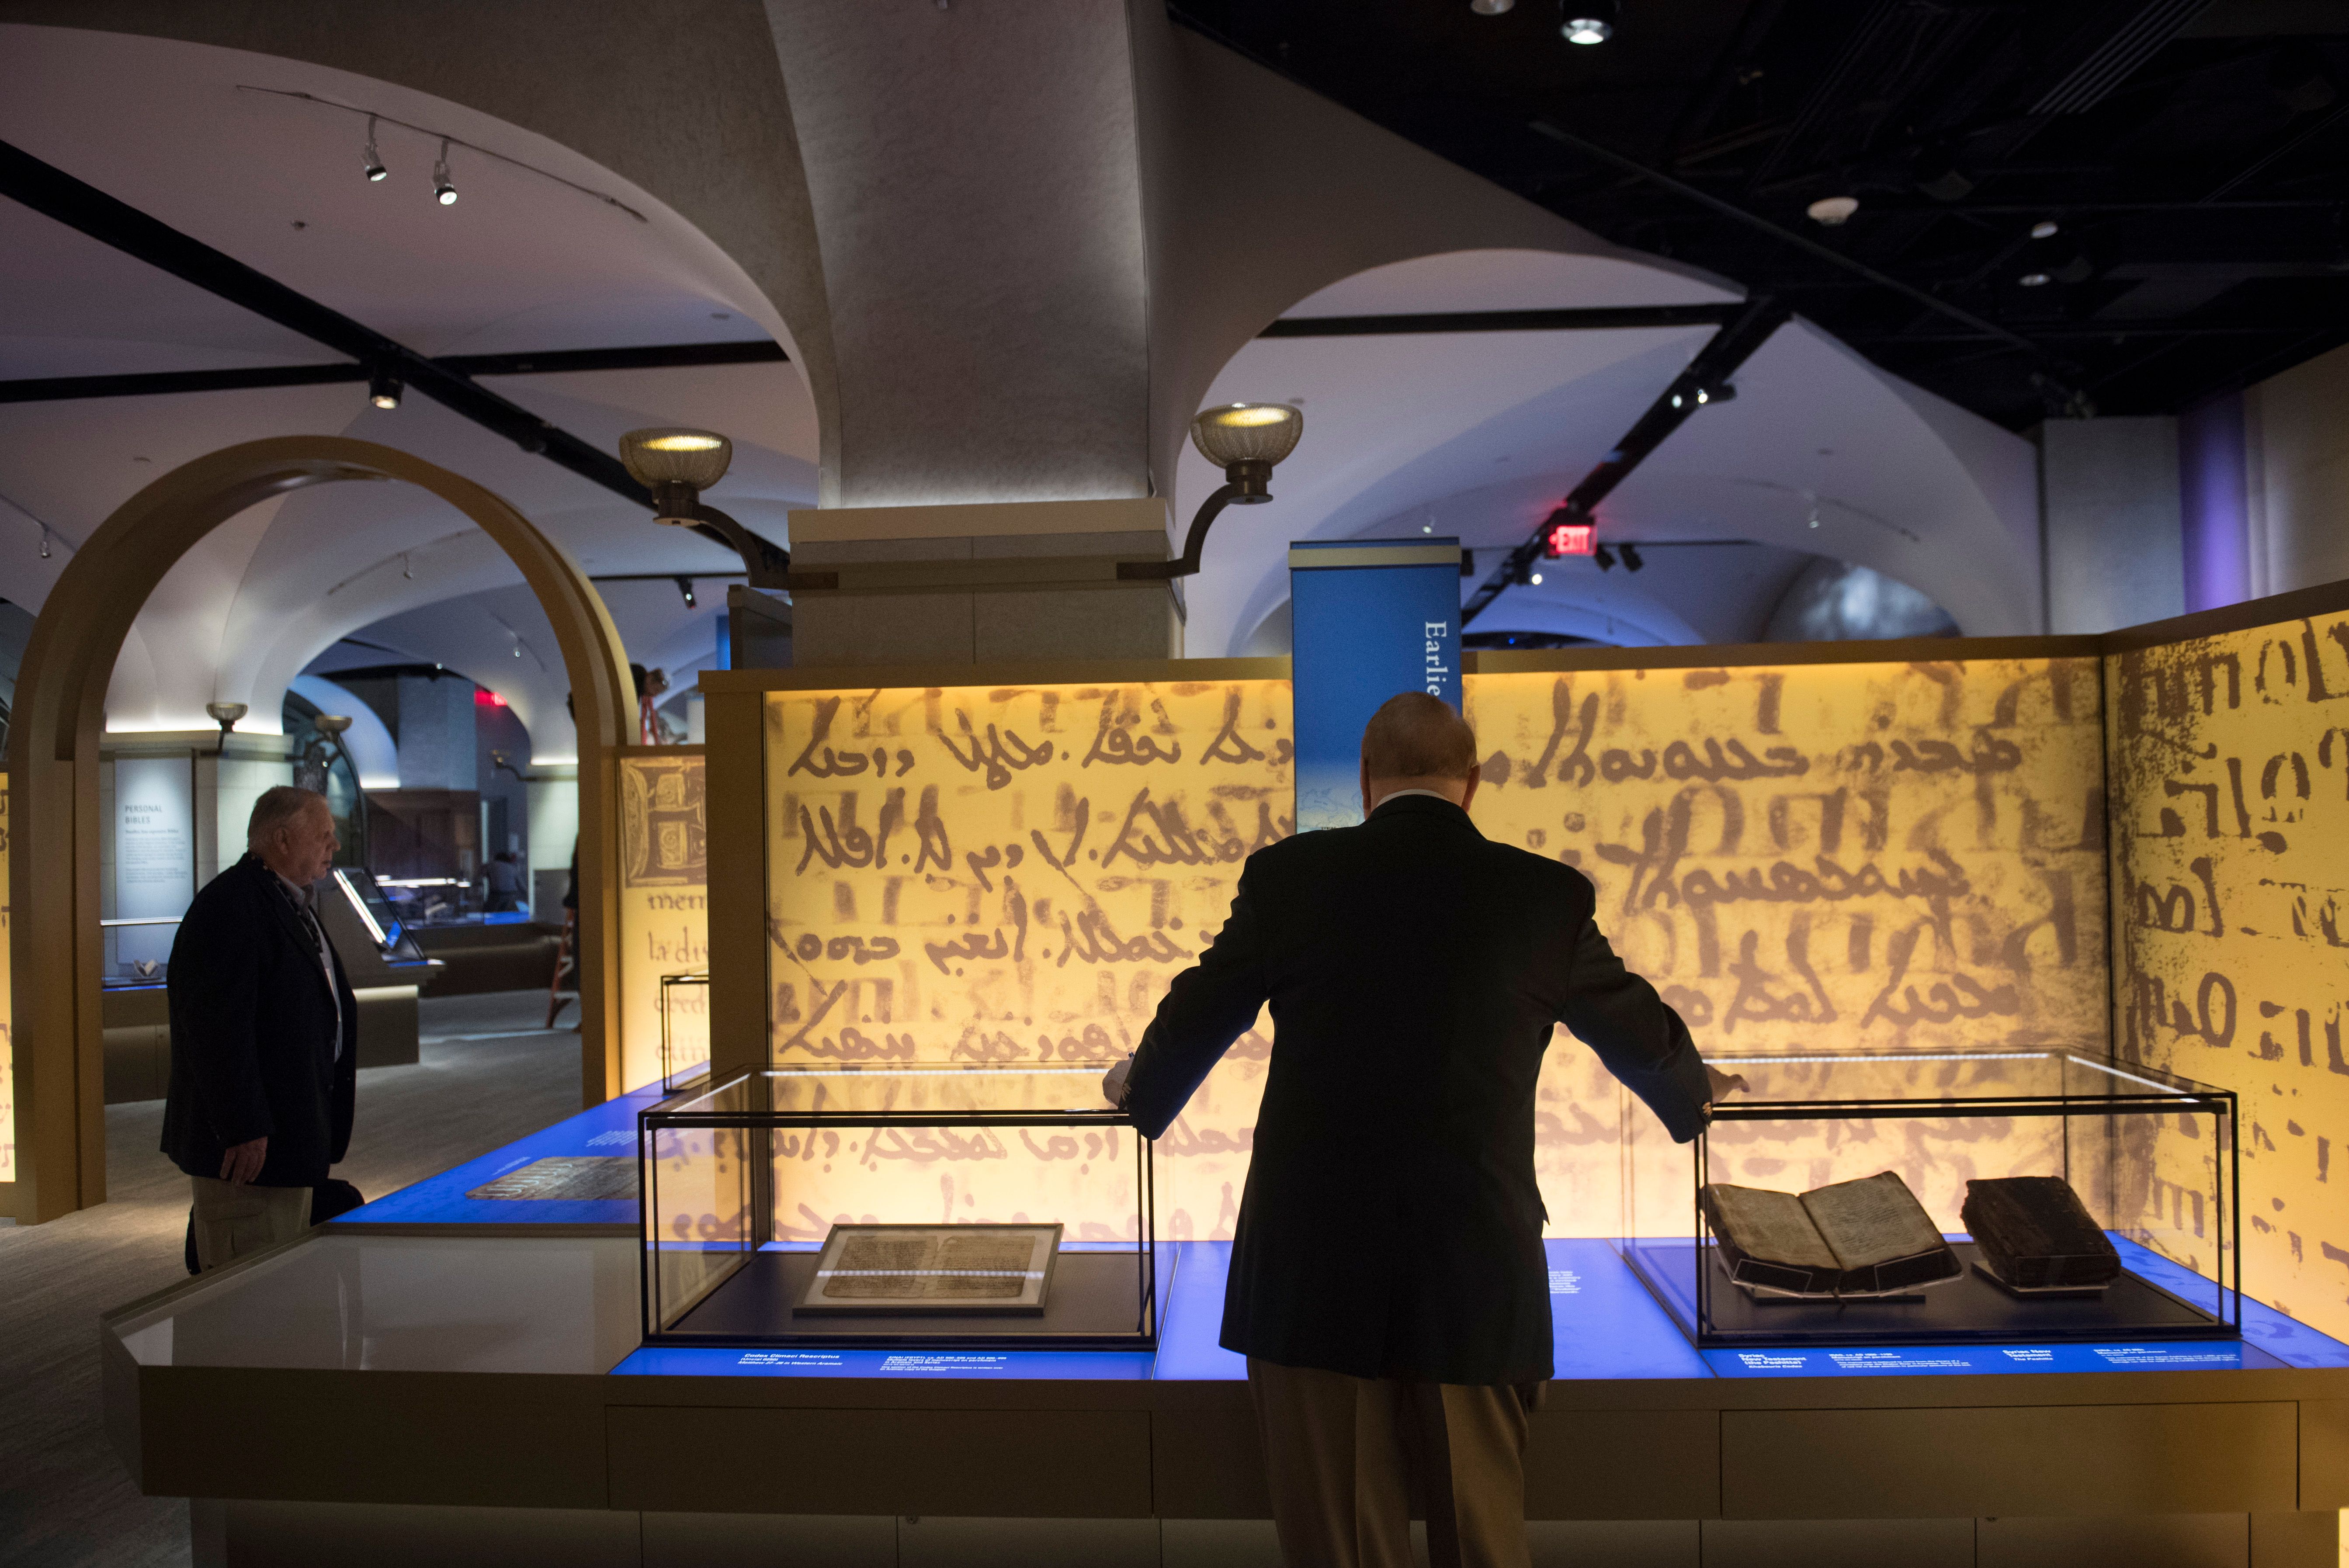 Visitors tour the "History of the Bible" exhibit during a media preview of the new Museum of the Bible, a museum dedicated to the history, narrative and impact of the Bible, in Washington, DC, November 14, 2017. SAUL LOEB/AFP/Getty Images